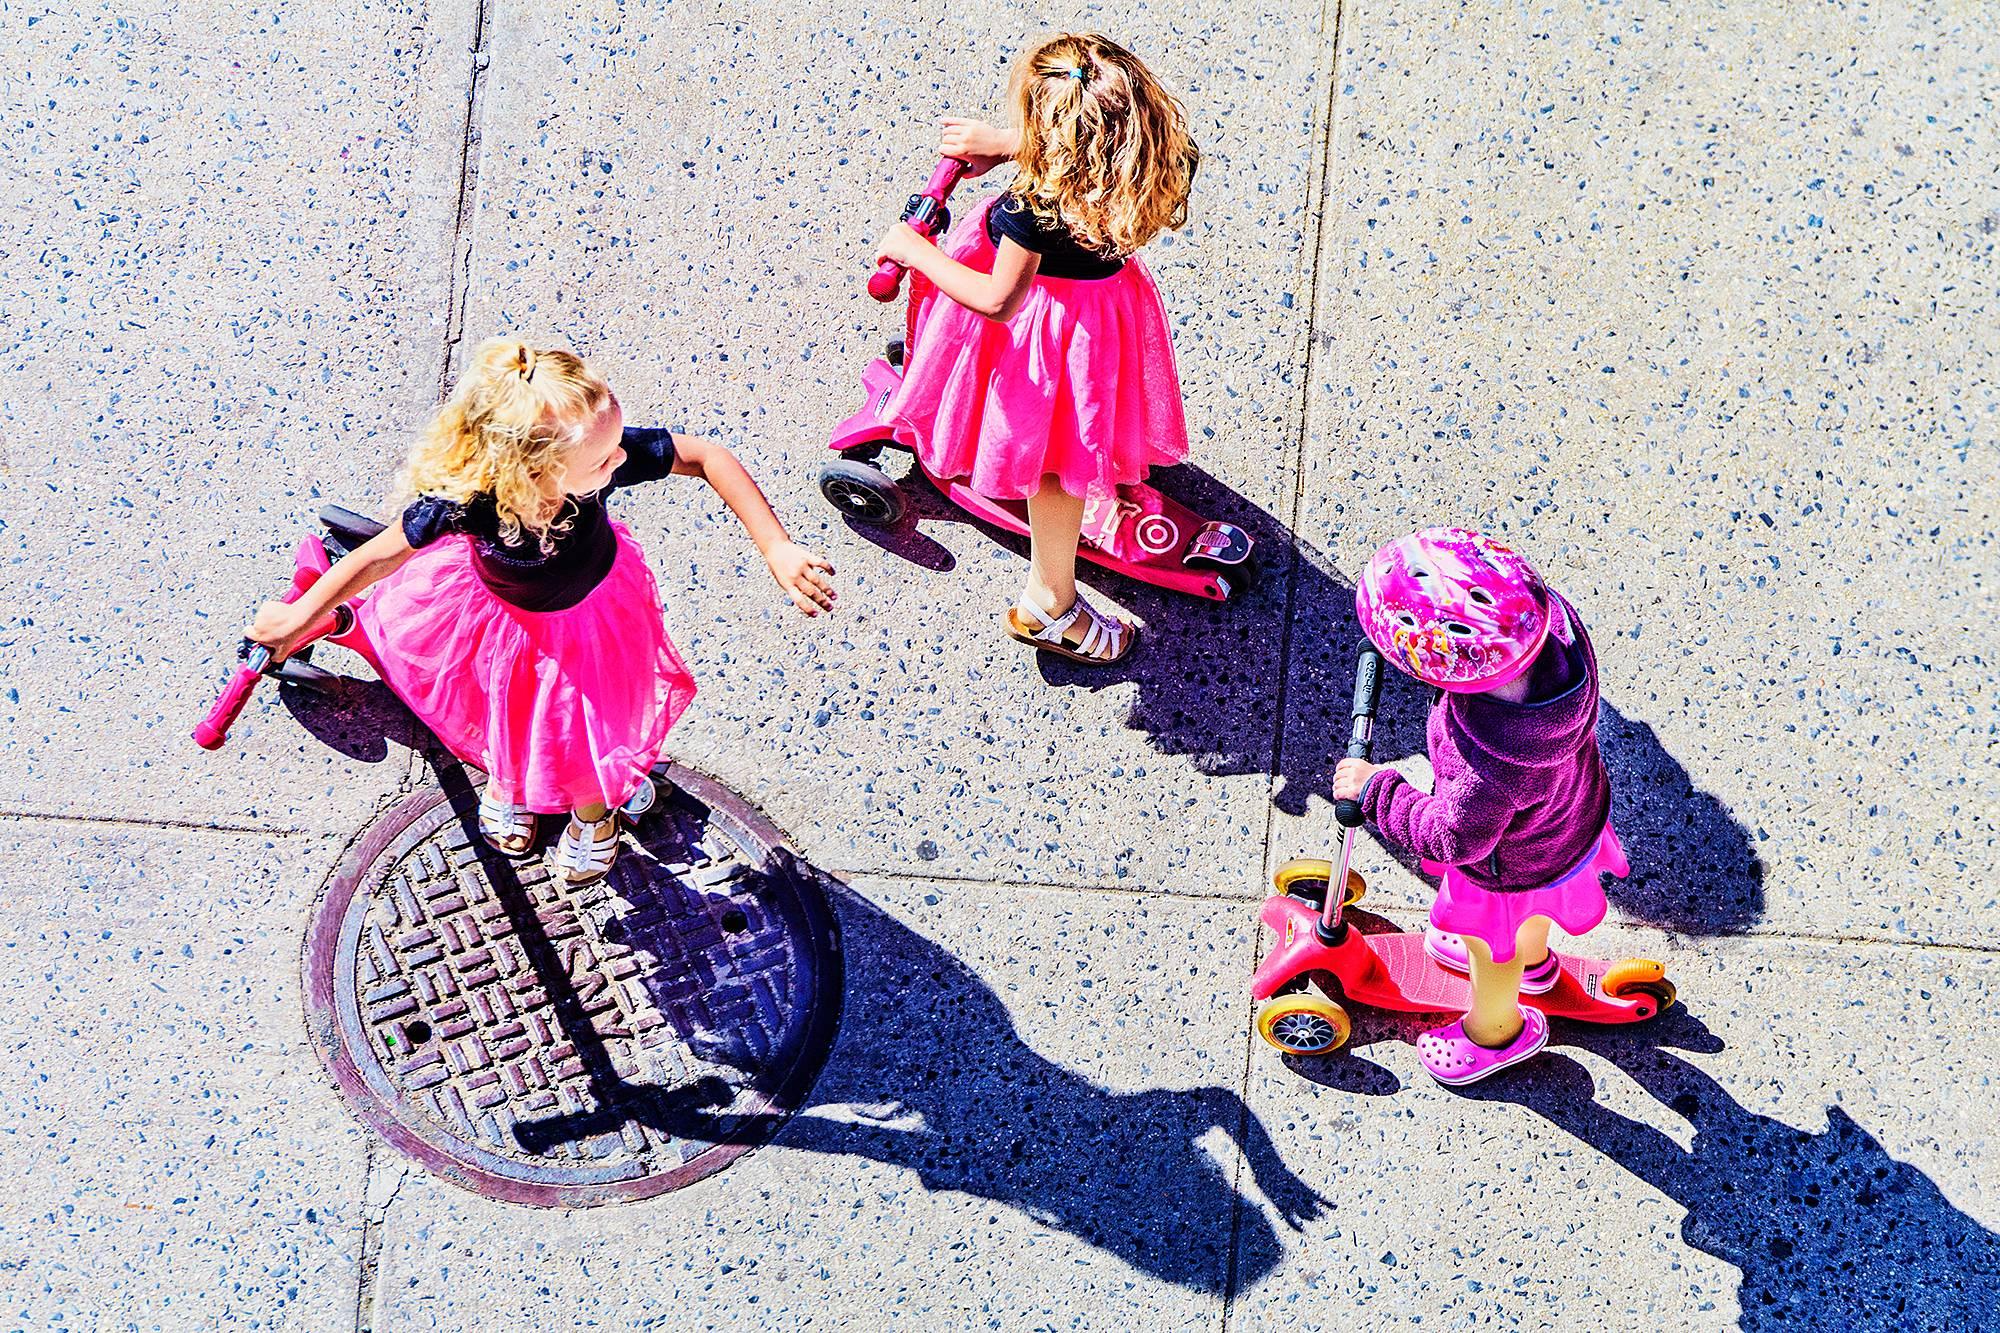 Abstract Photograph Mitchell Funk - Trois filles en rose